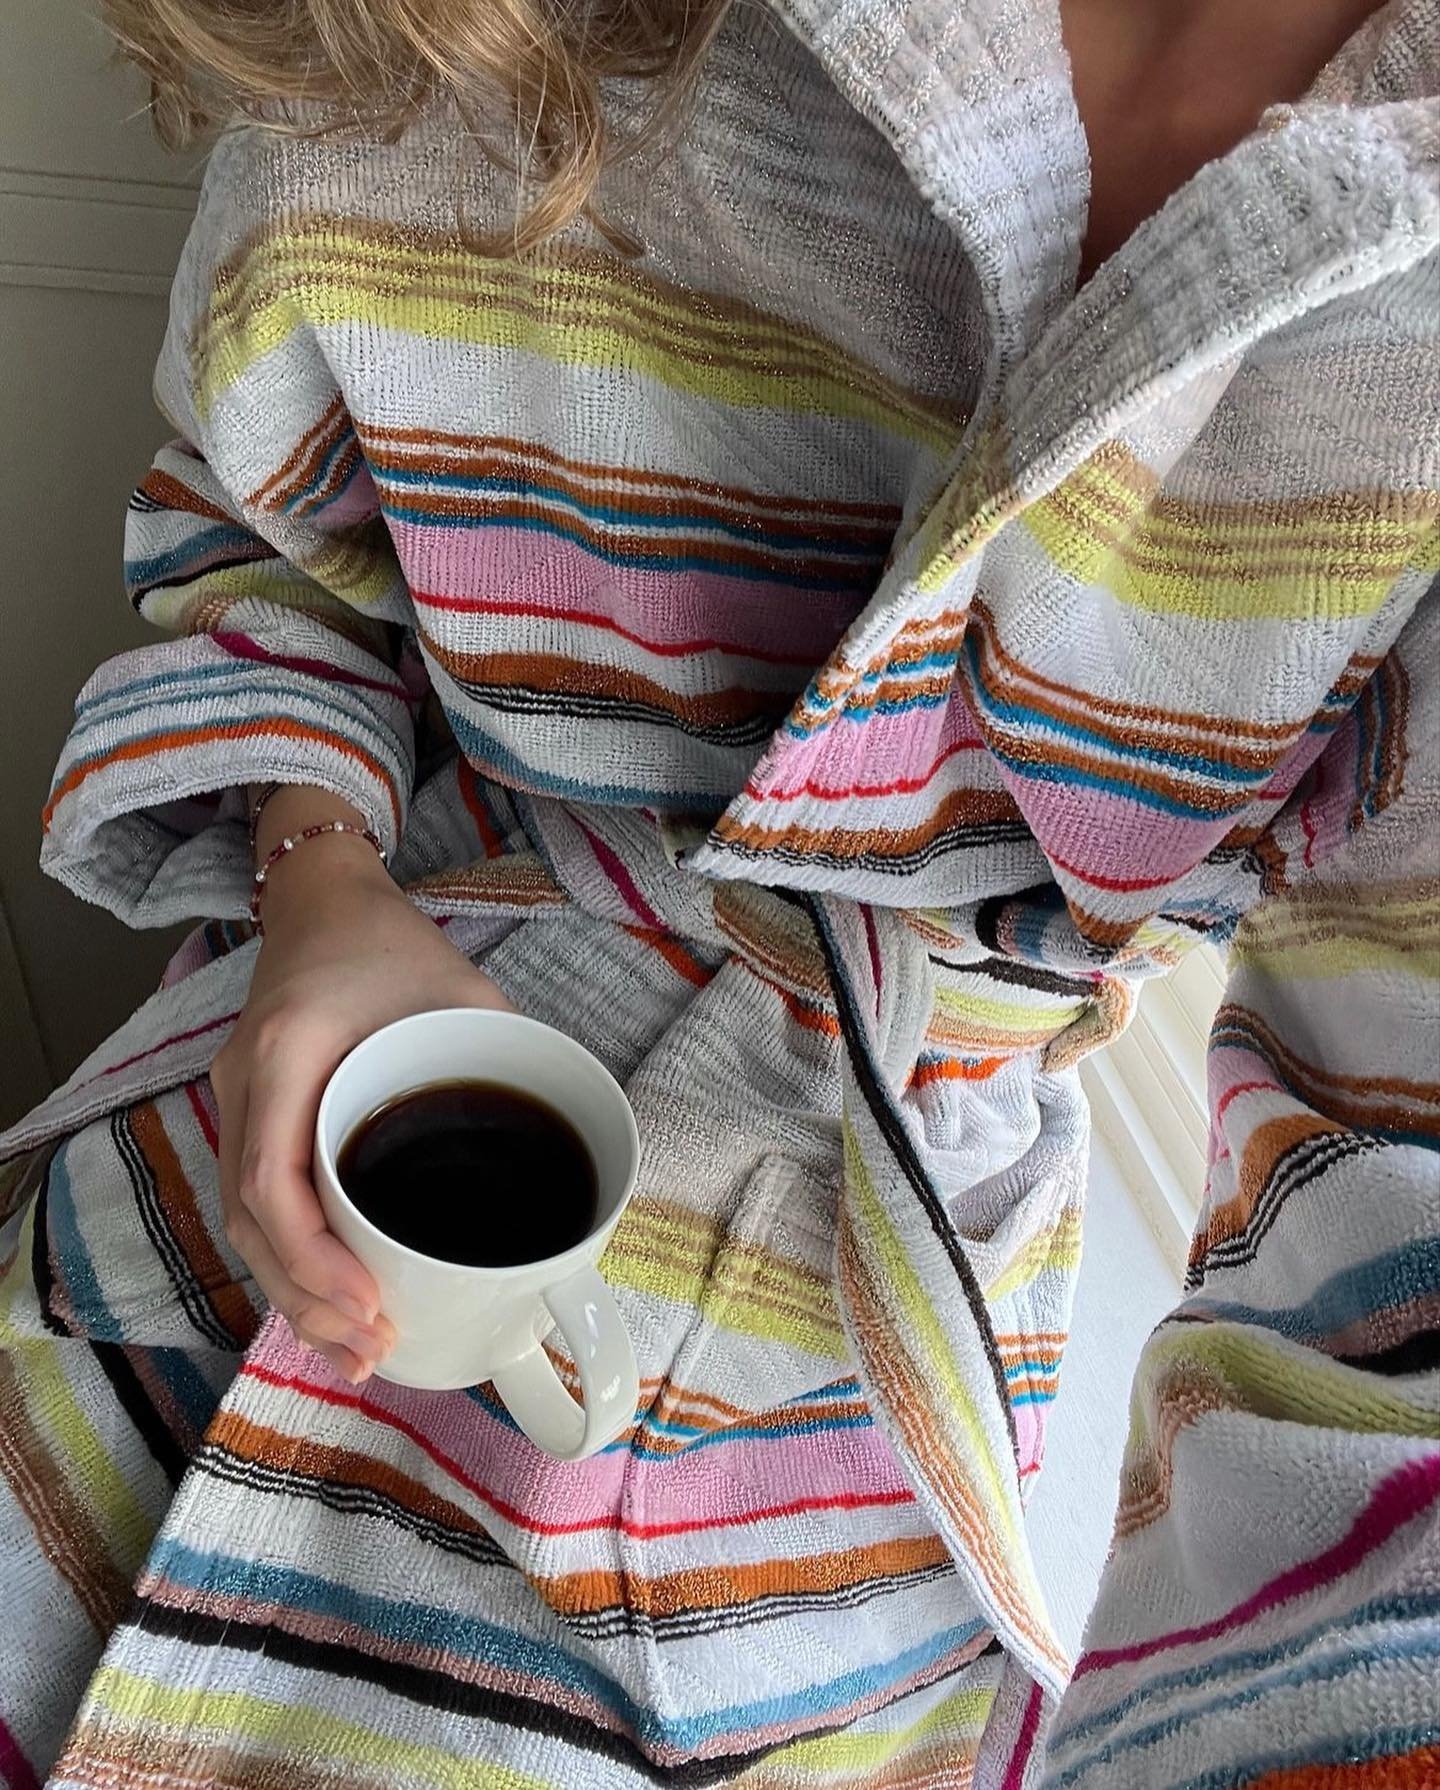 If this isn&rsquo;t the cutest bathrobe you&rsquo;ve ever seen then we don&rsquo;t know! Moonshadow Bathrobe from @missoni 💖 via @hoyerbergen 

#missoni #missonihome #missonihomecollection #interior #interiordesign #interiorinspiration #interiorinsp